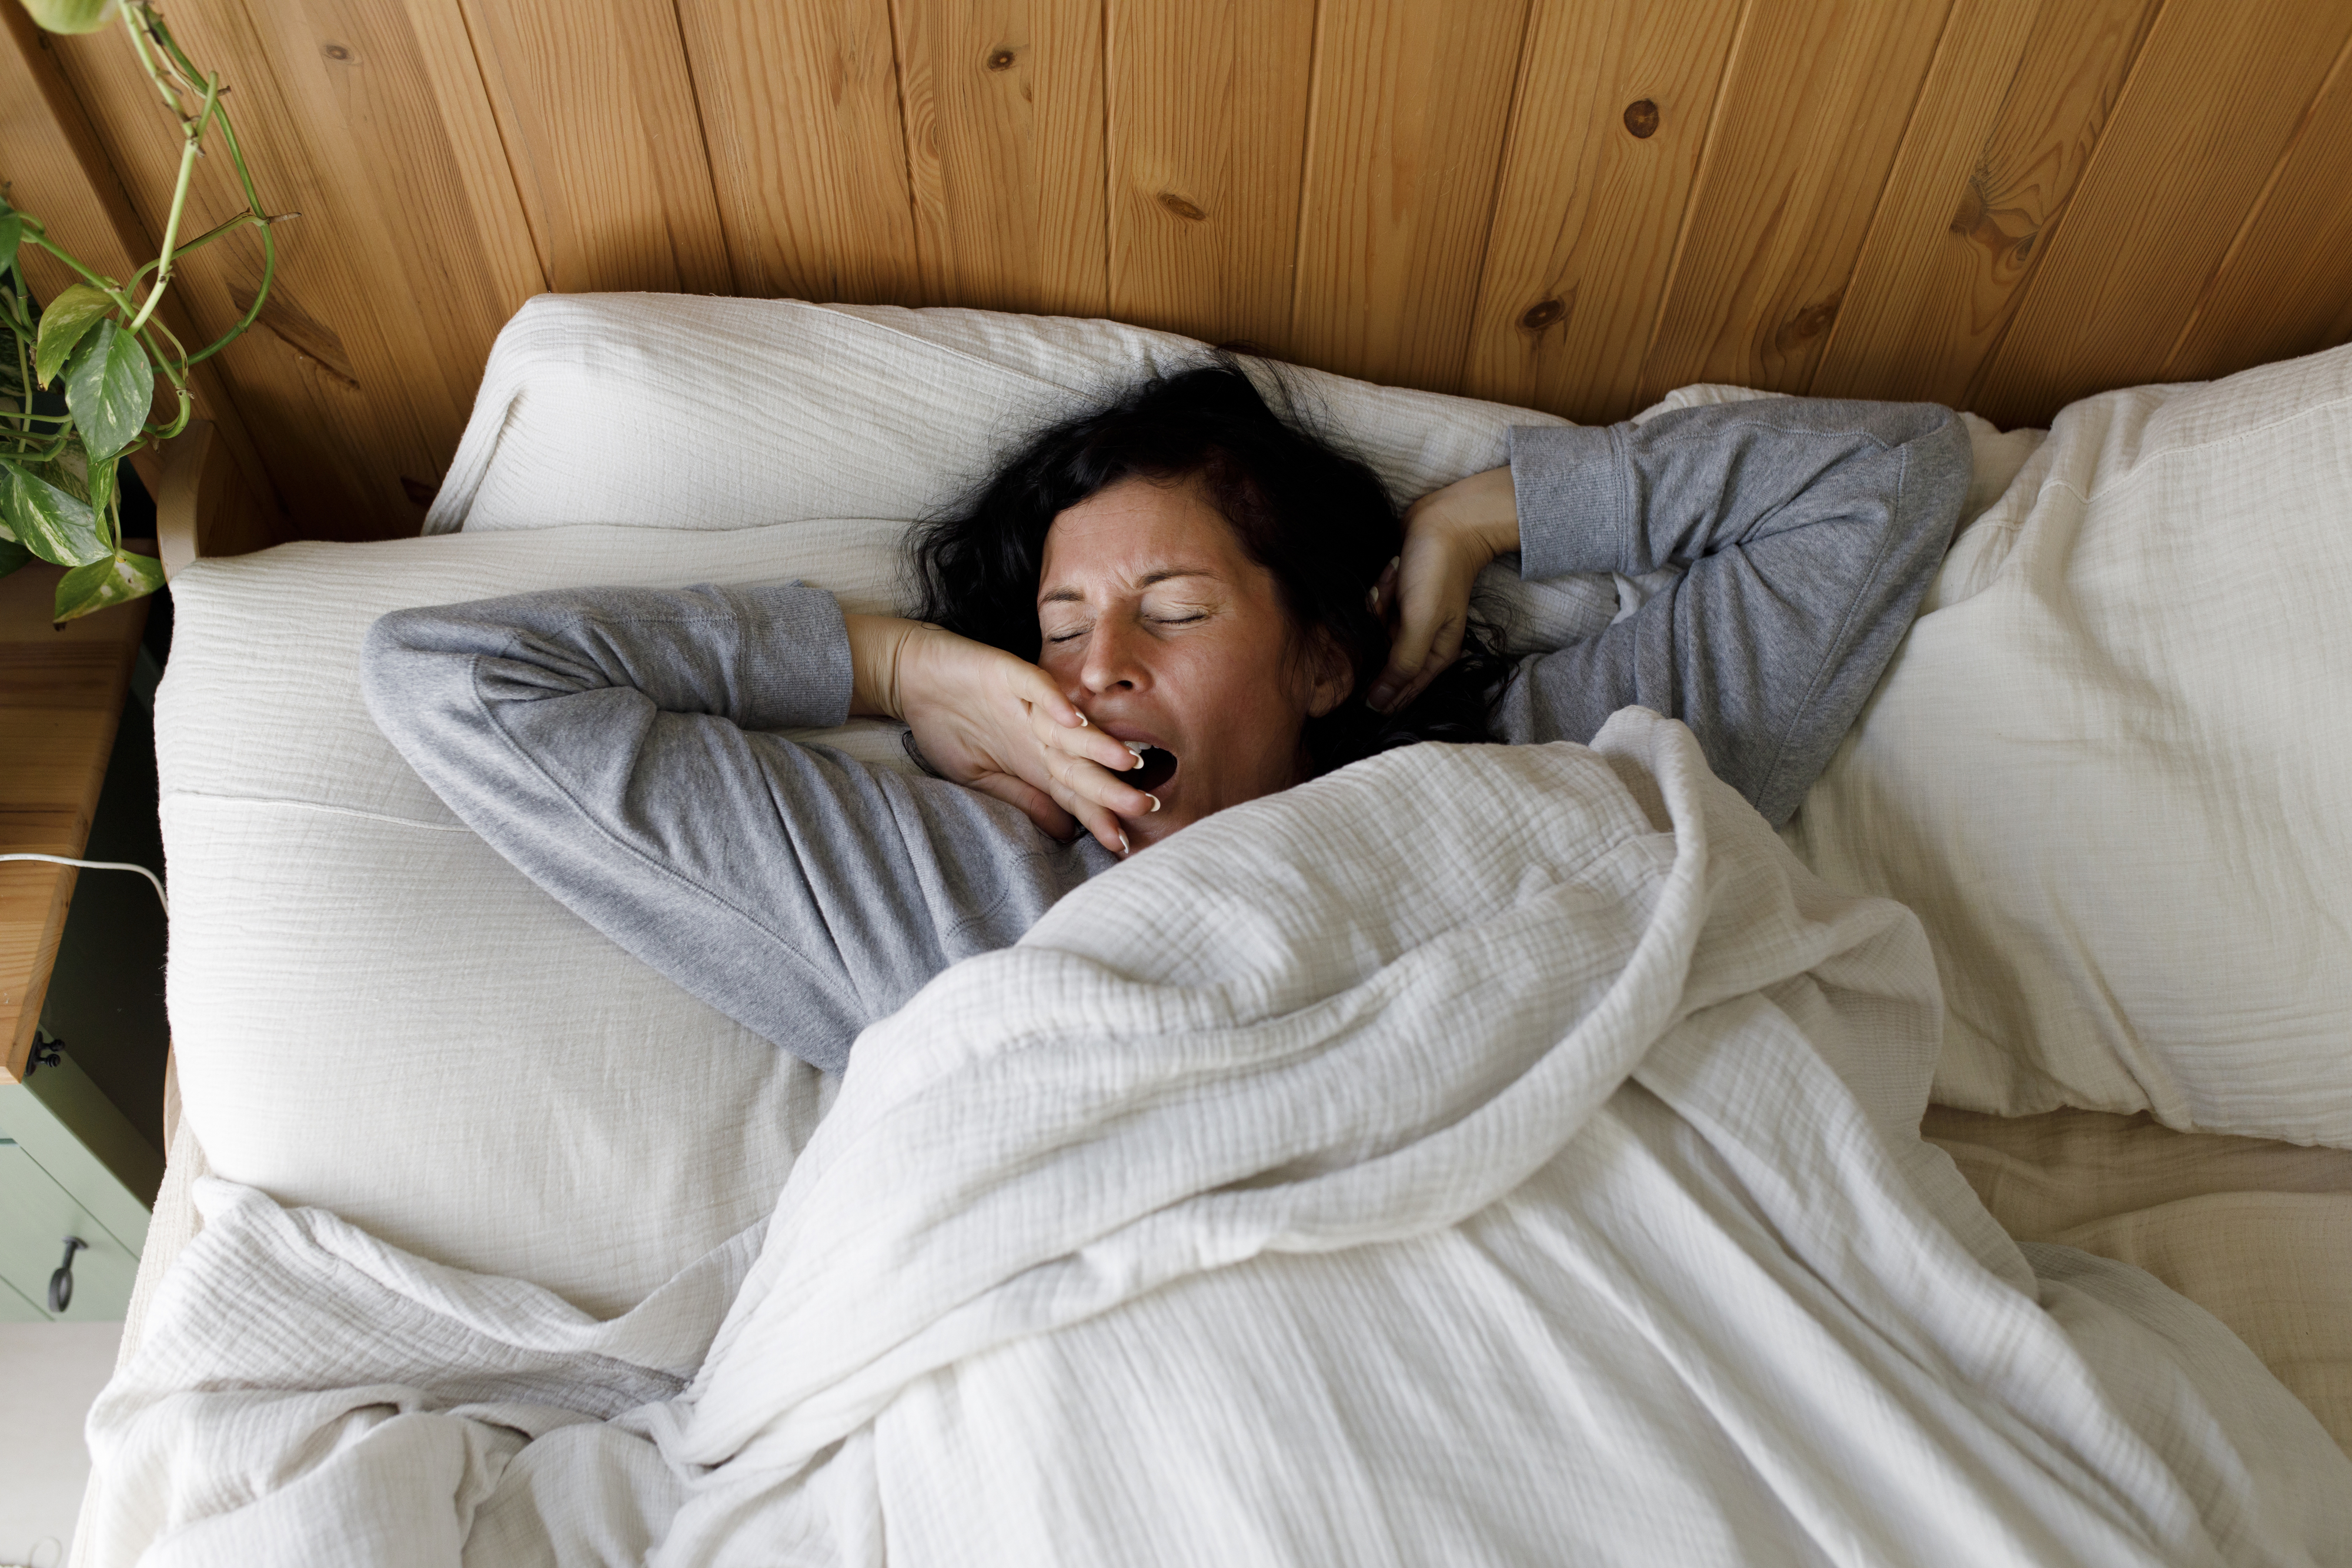 A woman yawning in bed